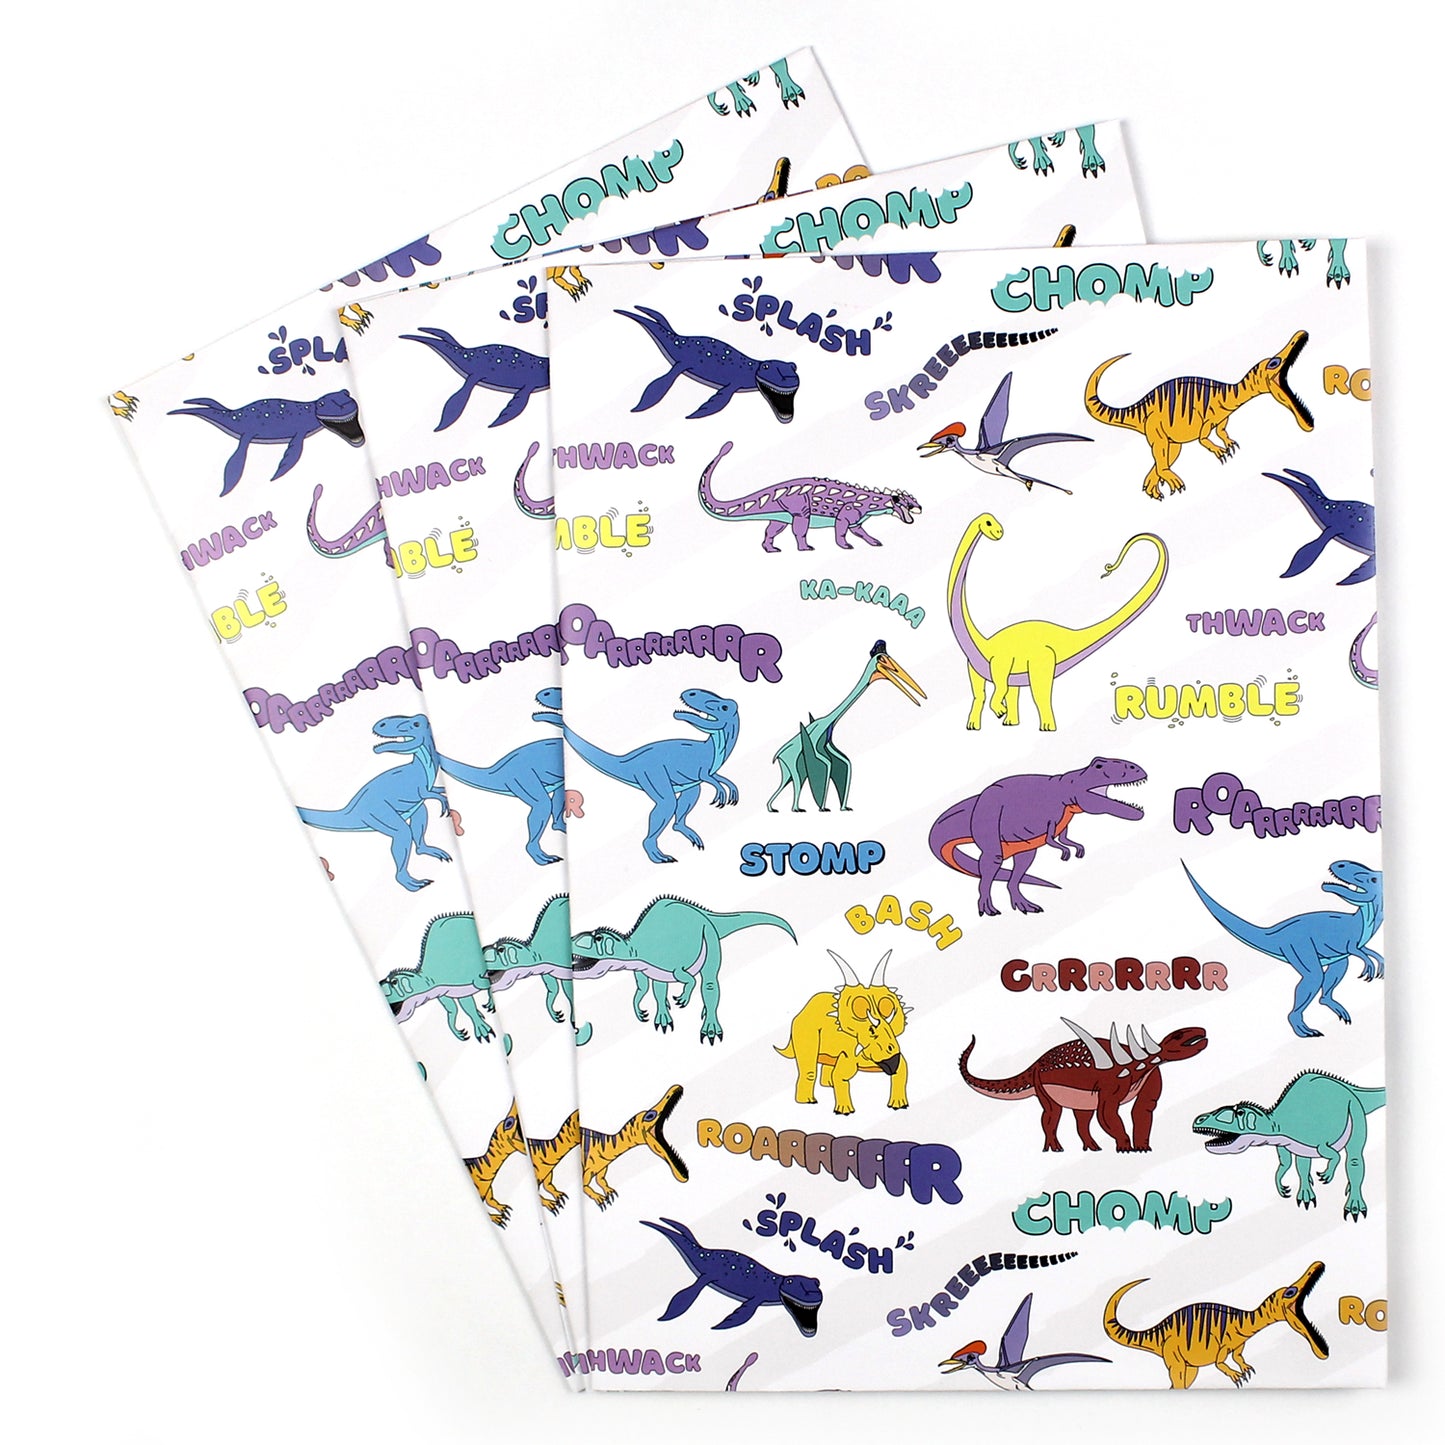 3 sheets of dinosaur words wrapping paper fanned out